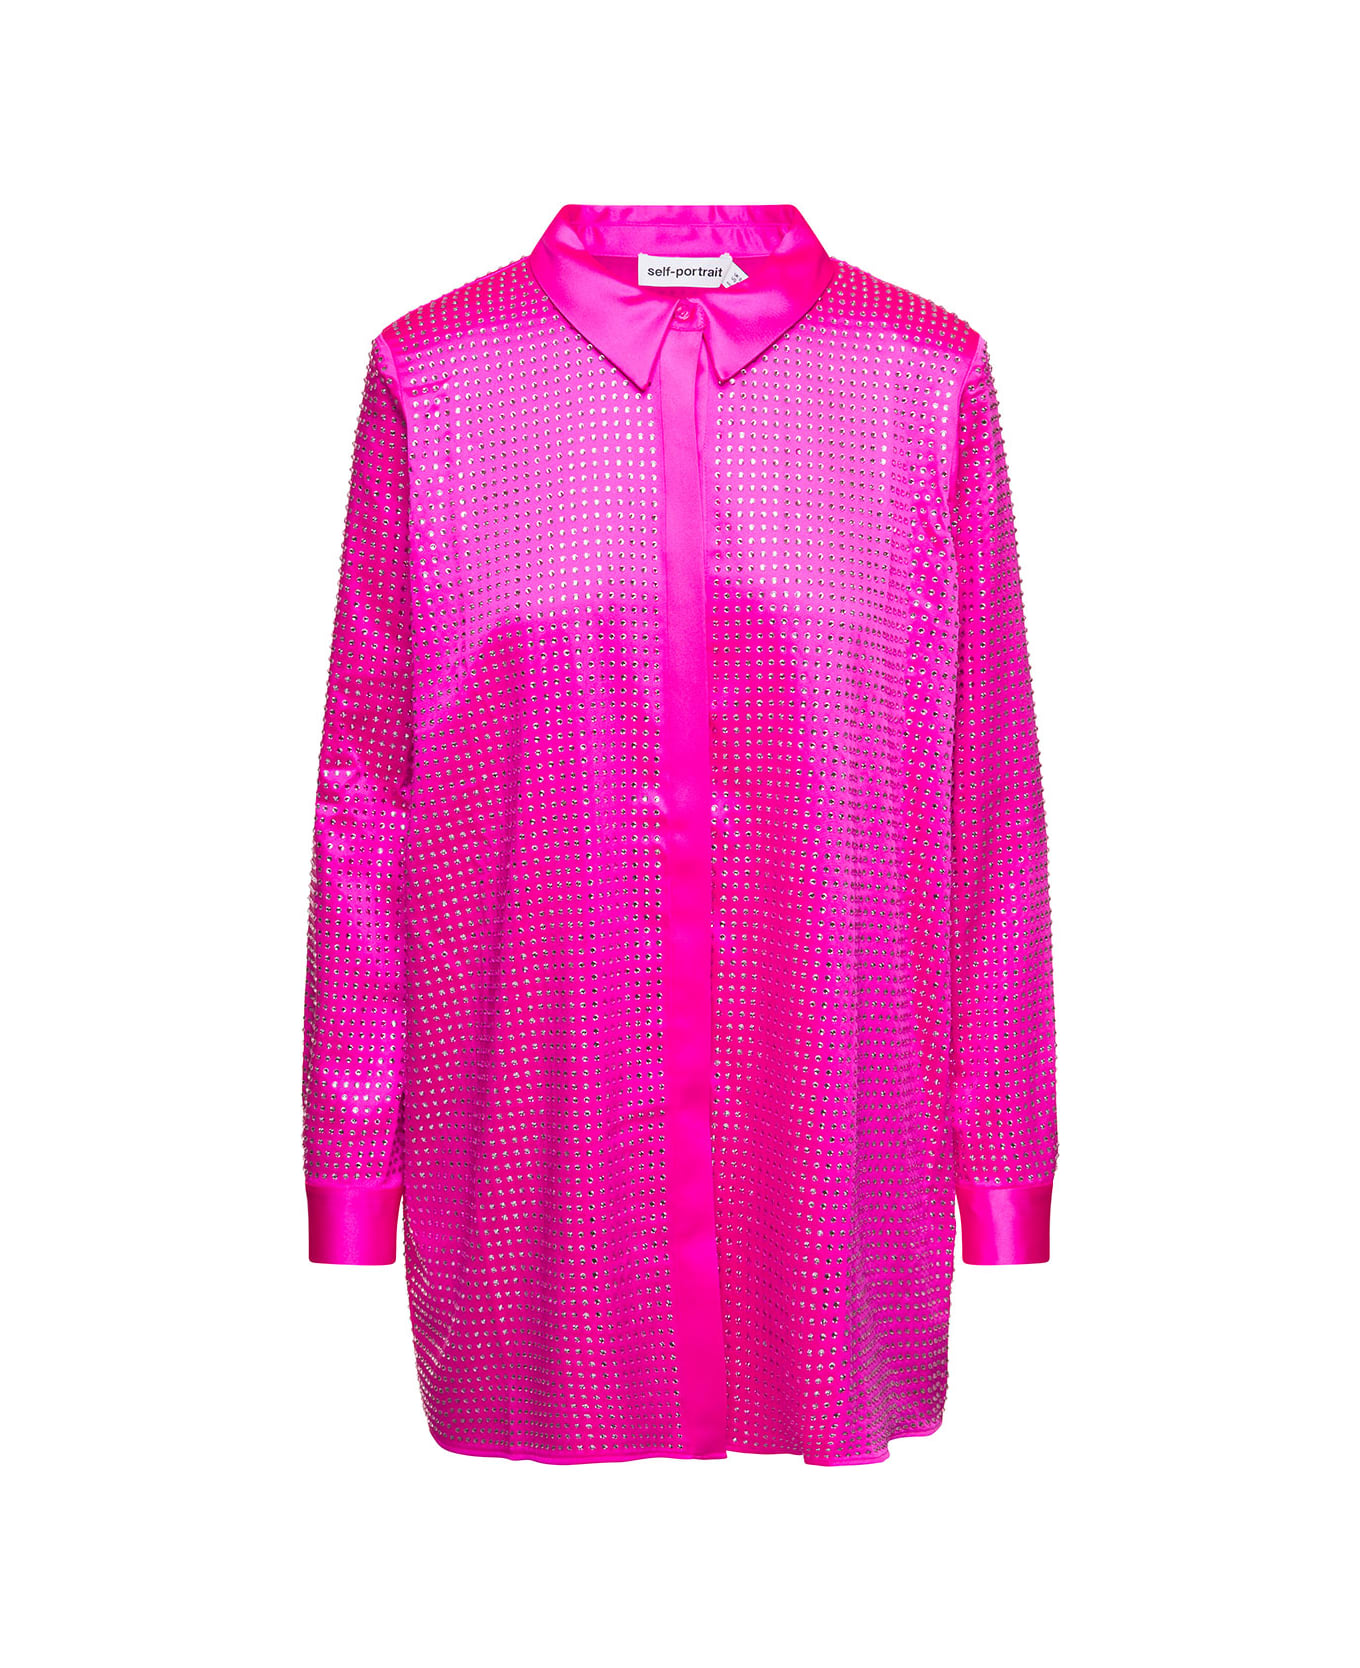 self-portrait Shirt With All-over Crystal Embellishment In Fuchsia Satin Woman - Fuxia